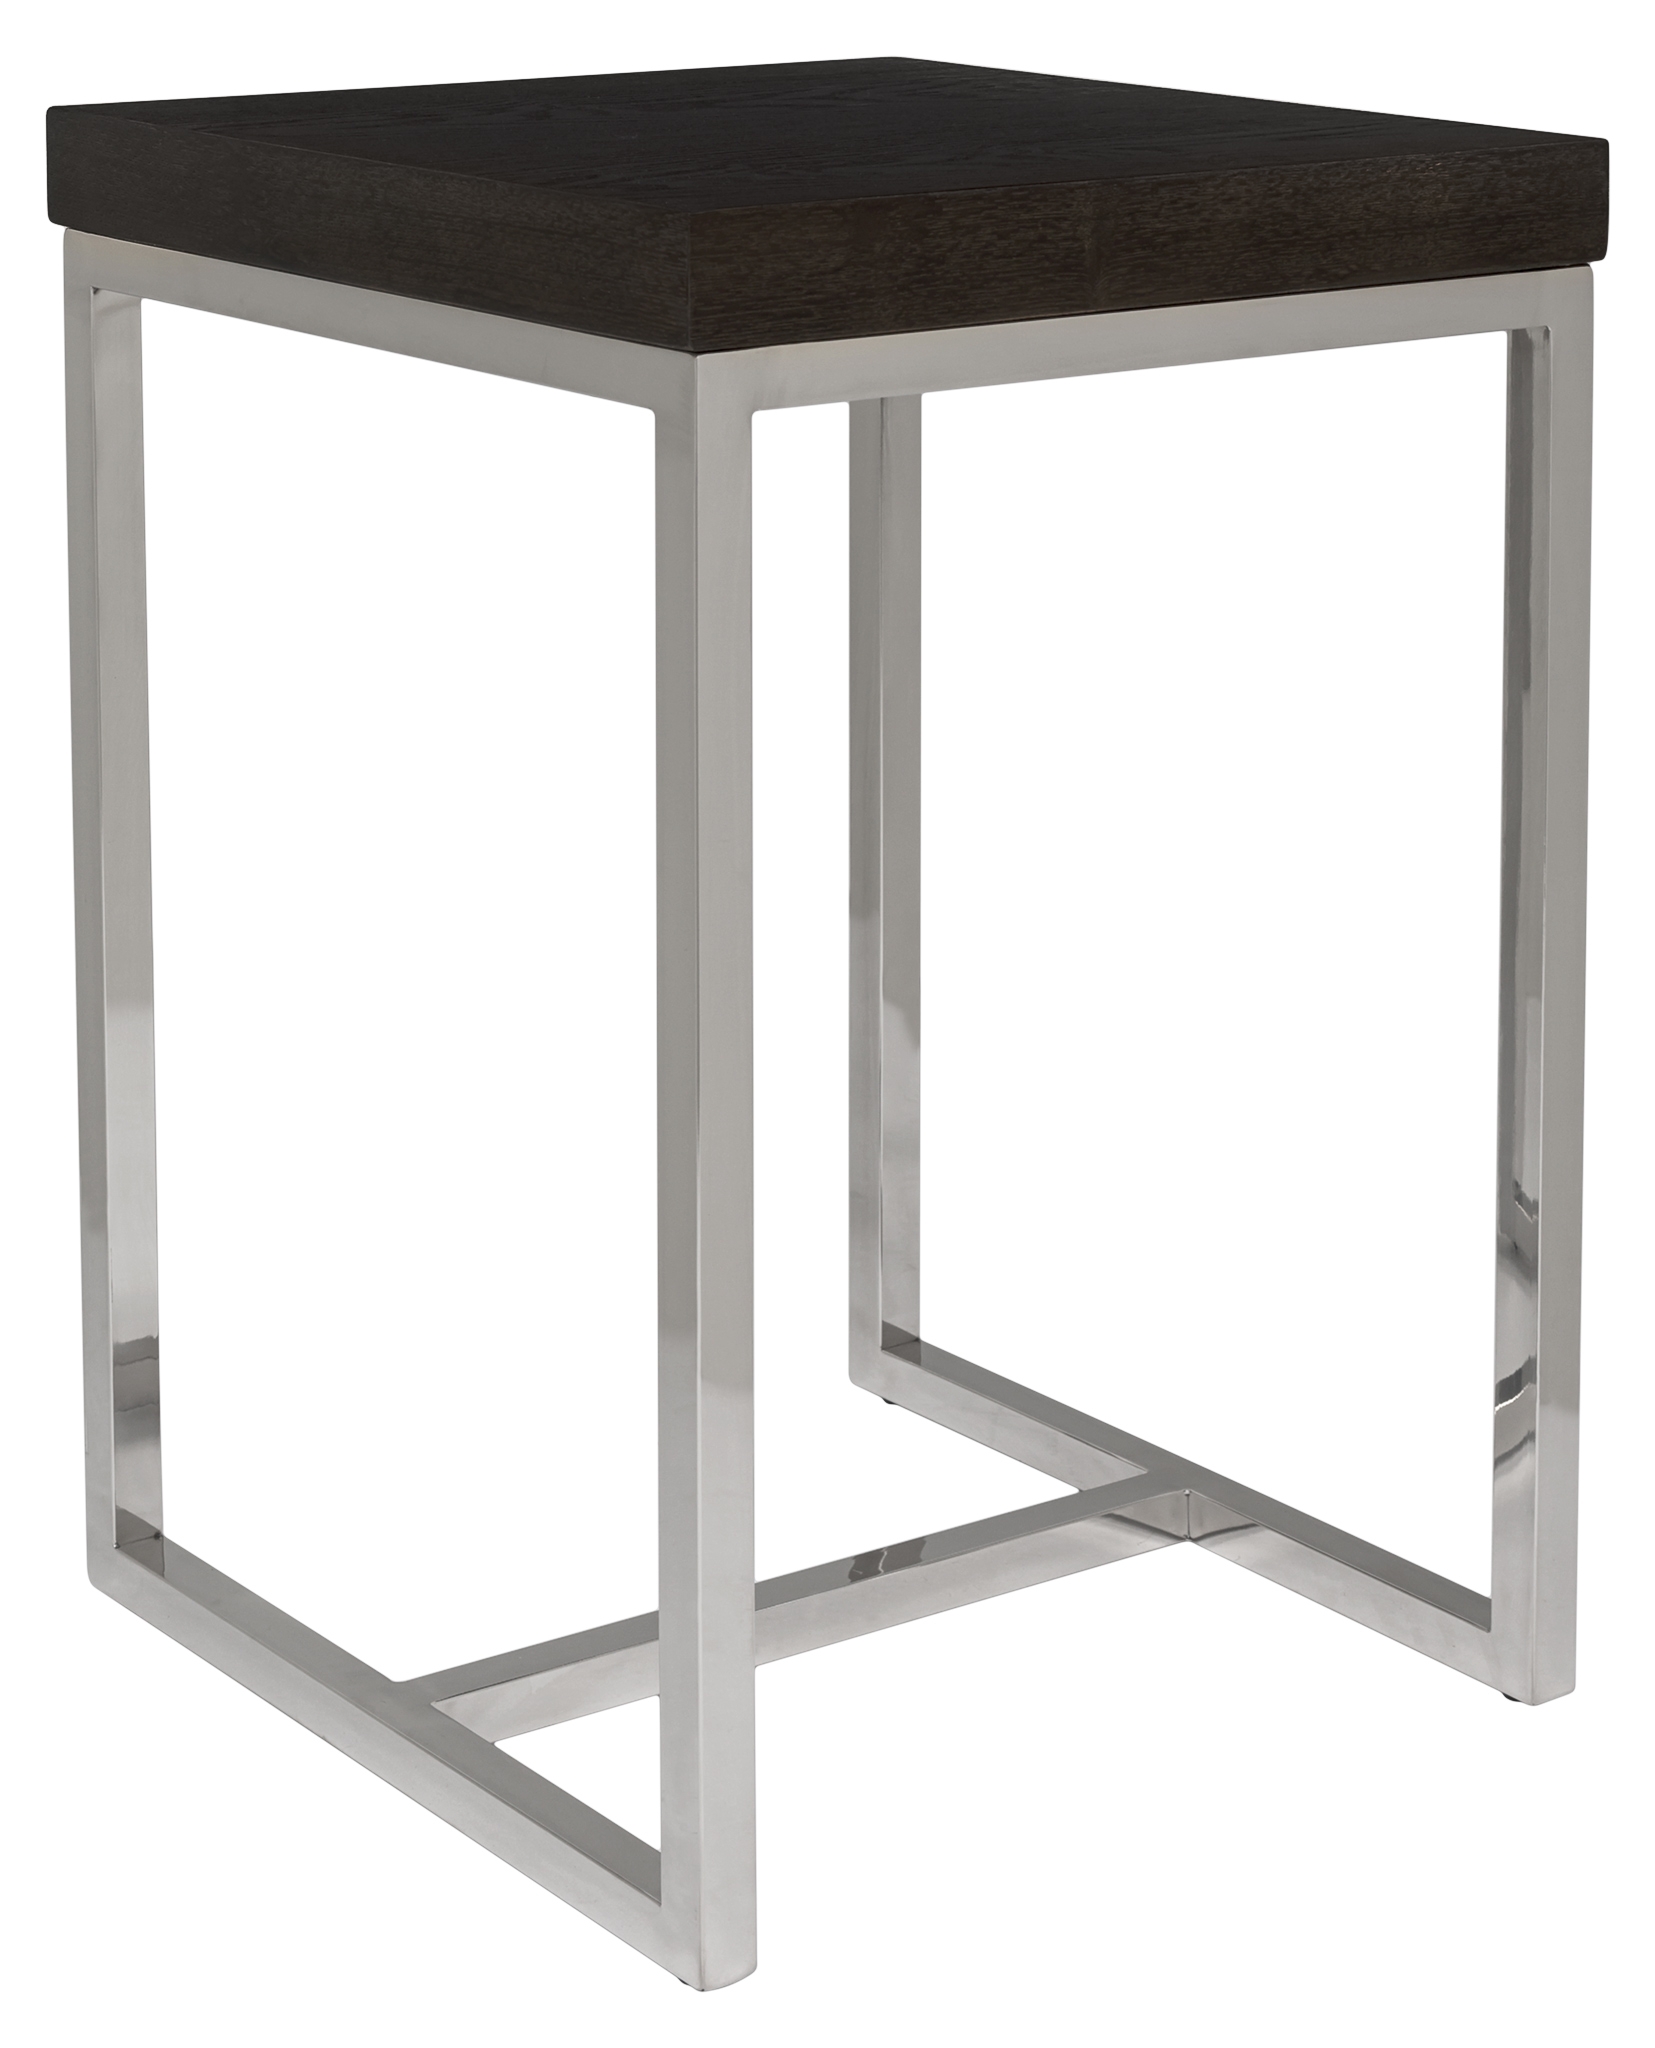 Turner Glass Top Square End Table - Black - Arlo Home - Image 0